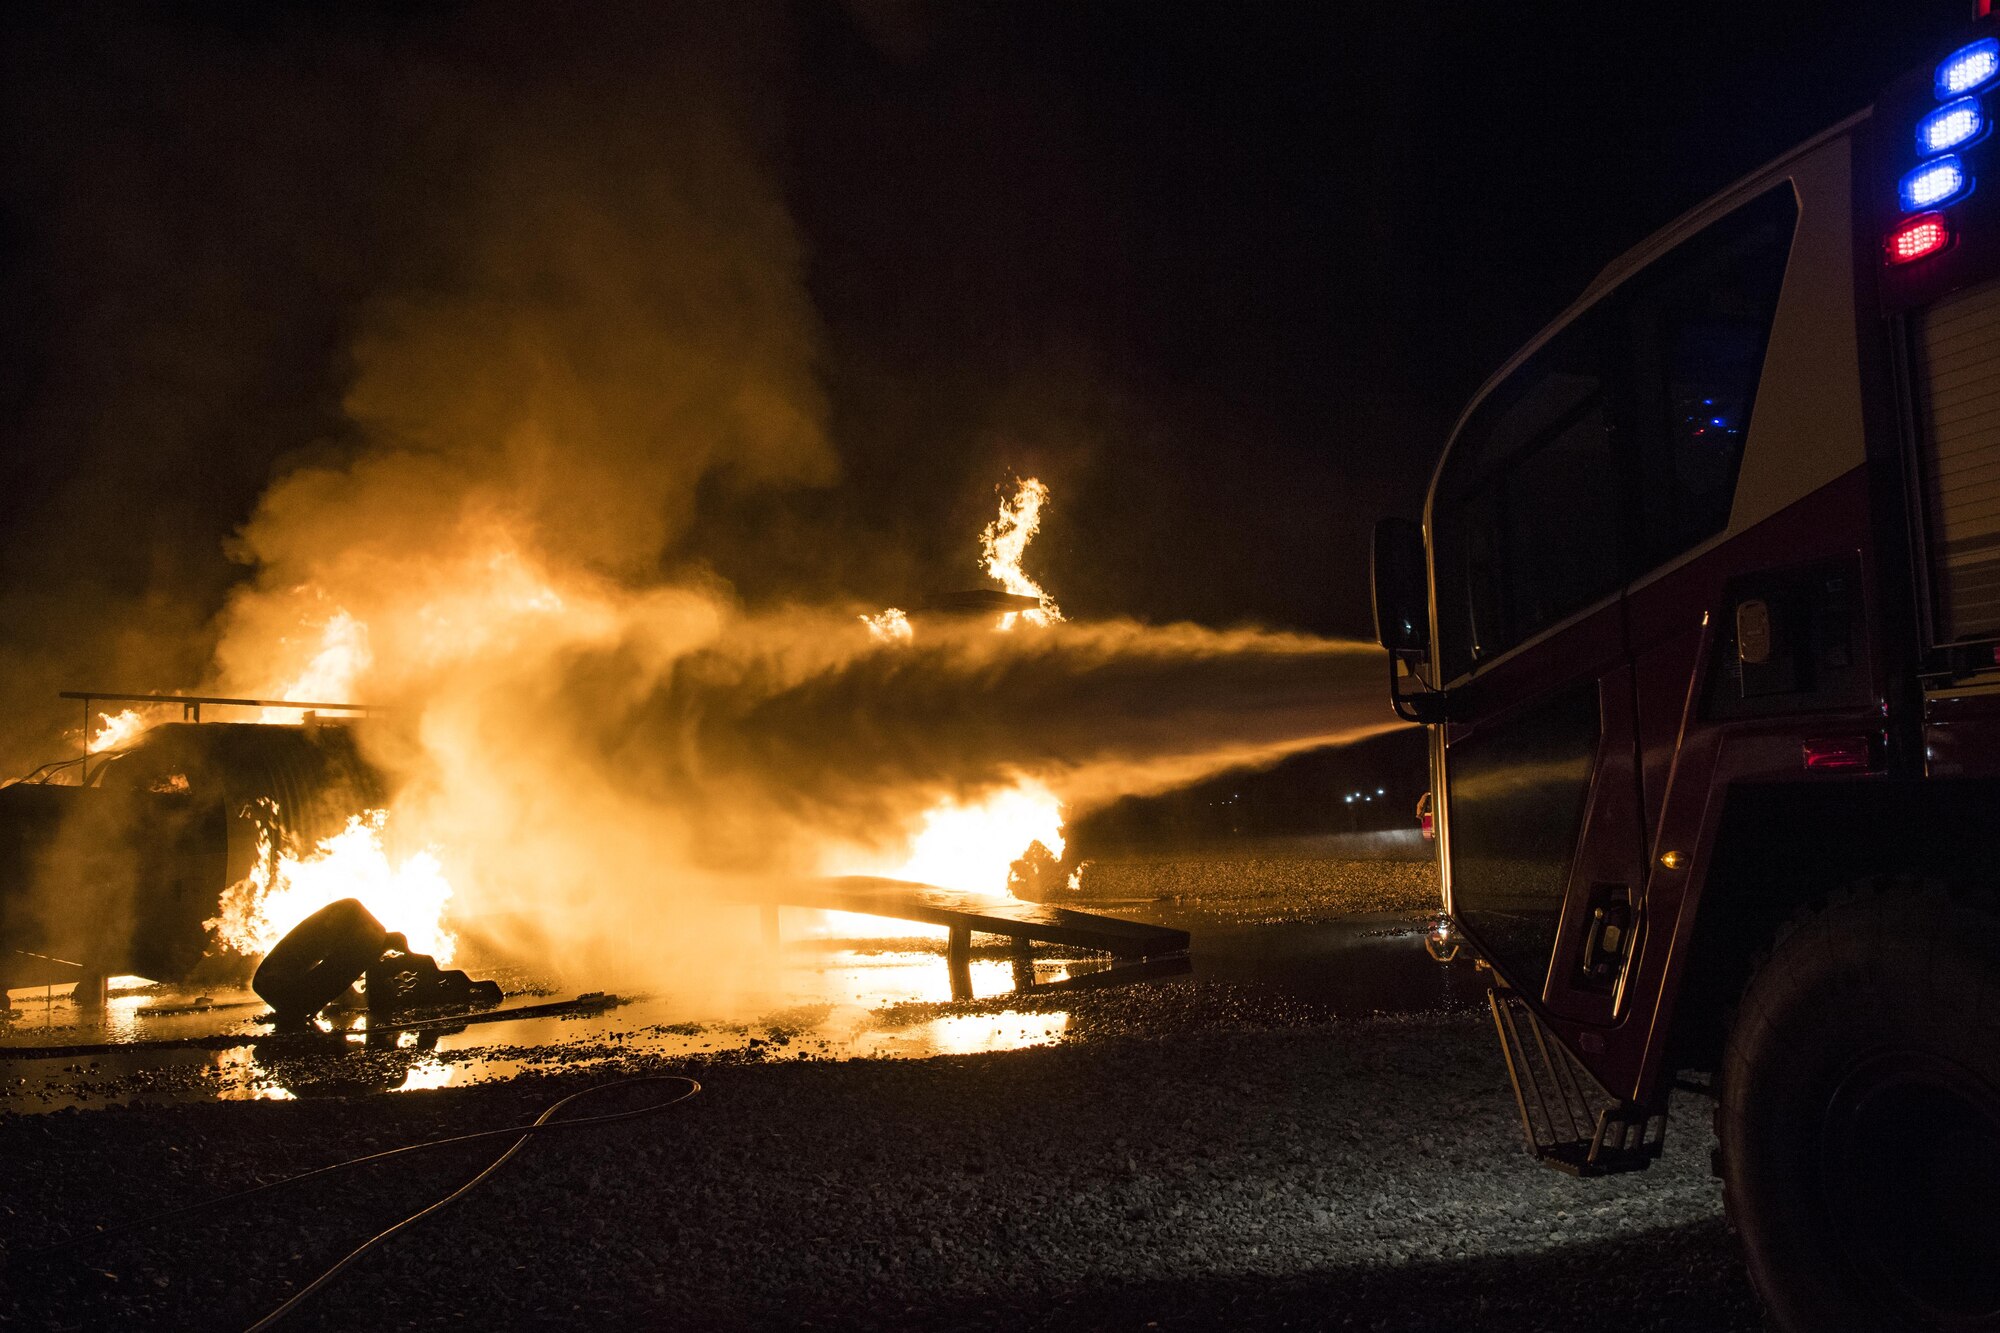 Water shoots out of a firetruck’s turret during nighttime live-fire training, Nov. 8, 2017, at Moody Air Force Base, Ga. This training is an annual requirement for Moody firefighters and is just one of the ways they stay ready to protect people, property and the environment from fires and disasters. (U.S. Air Force photo by Senior Airman Janiqua P. Robinson)